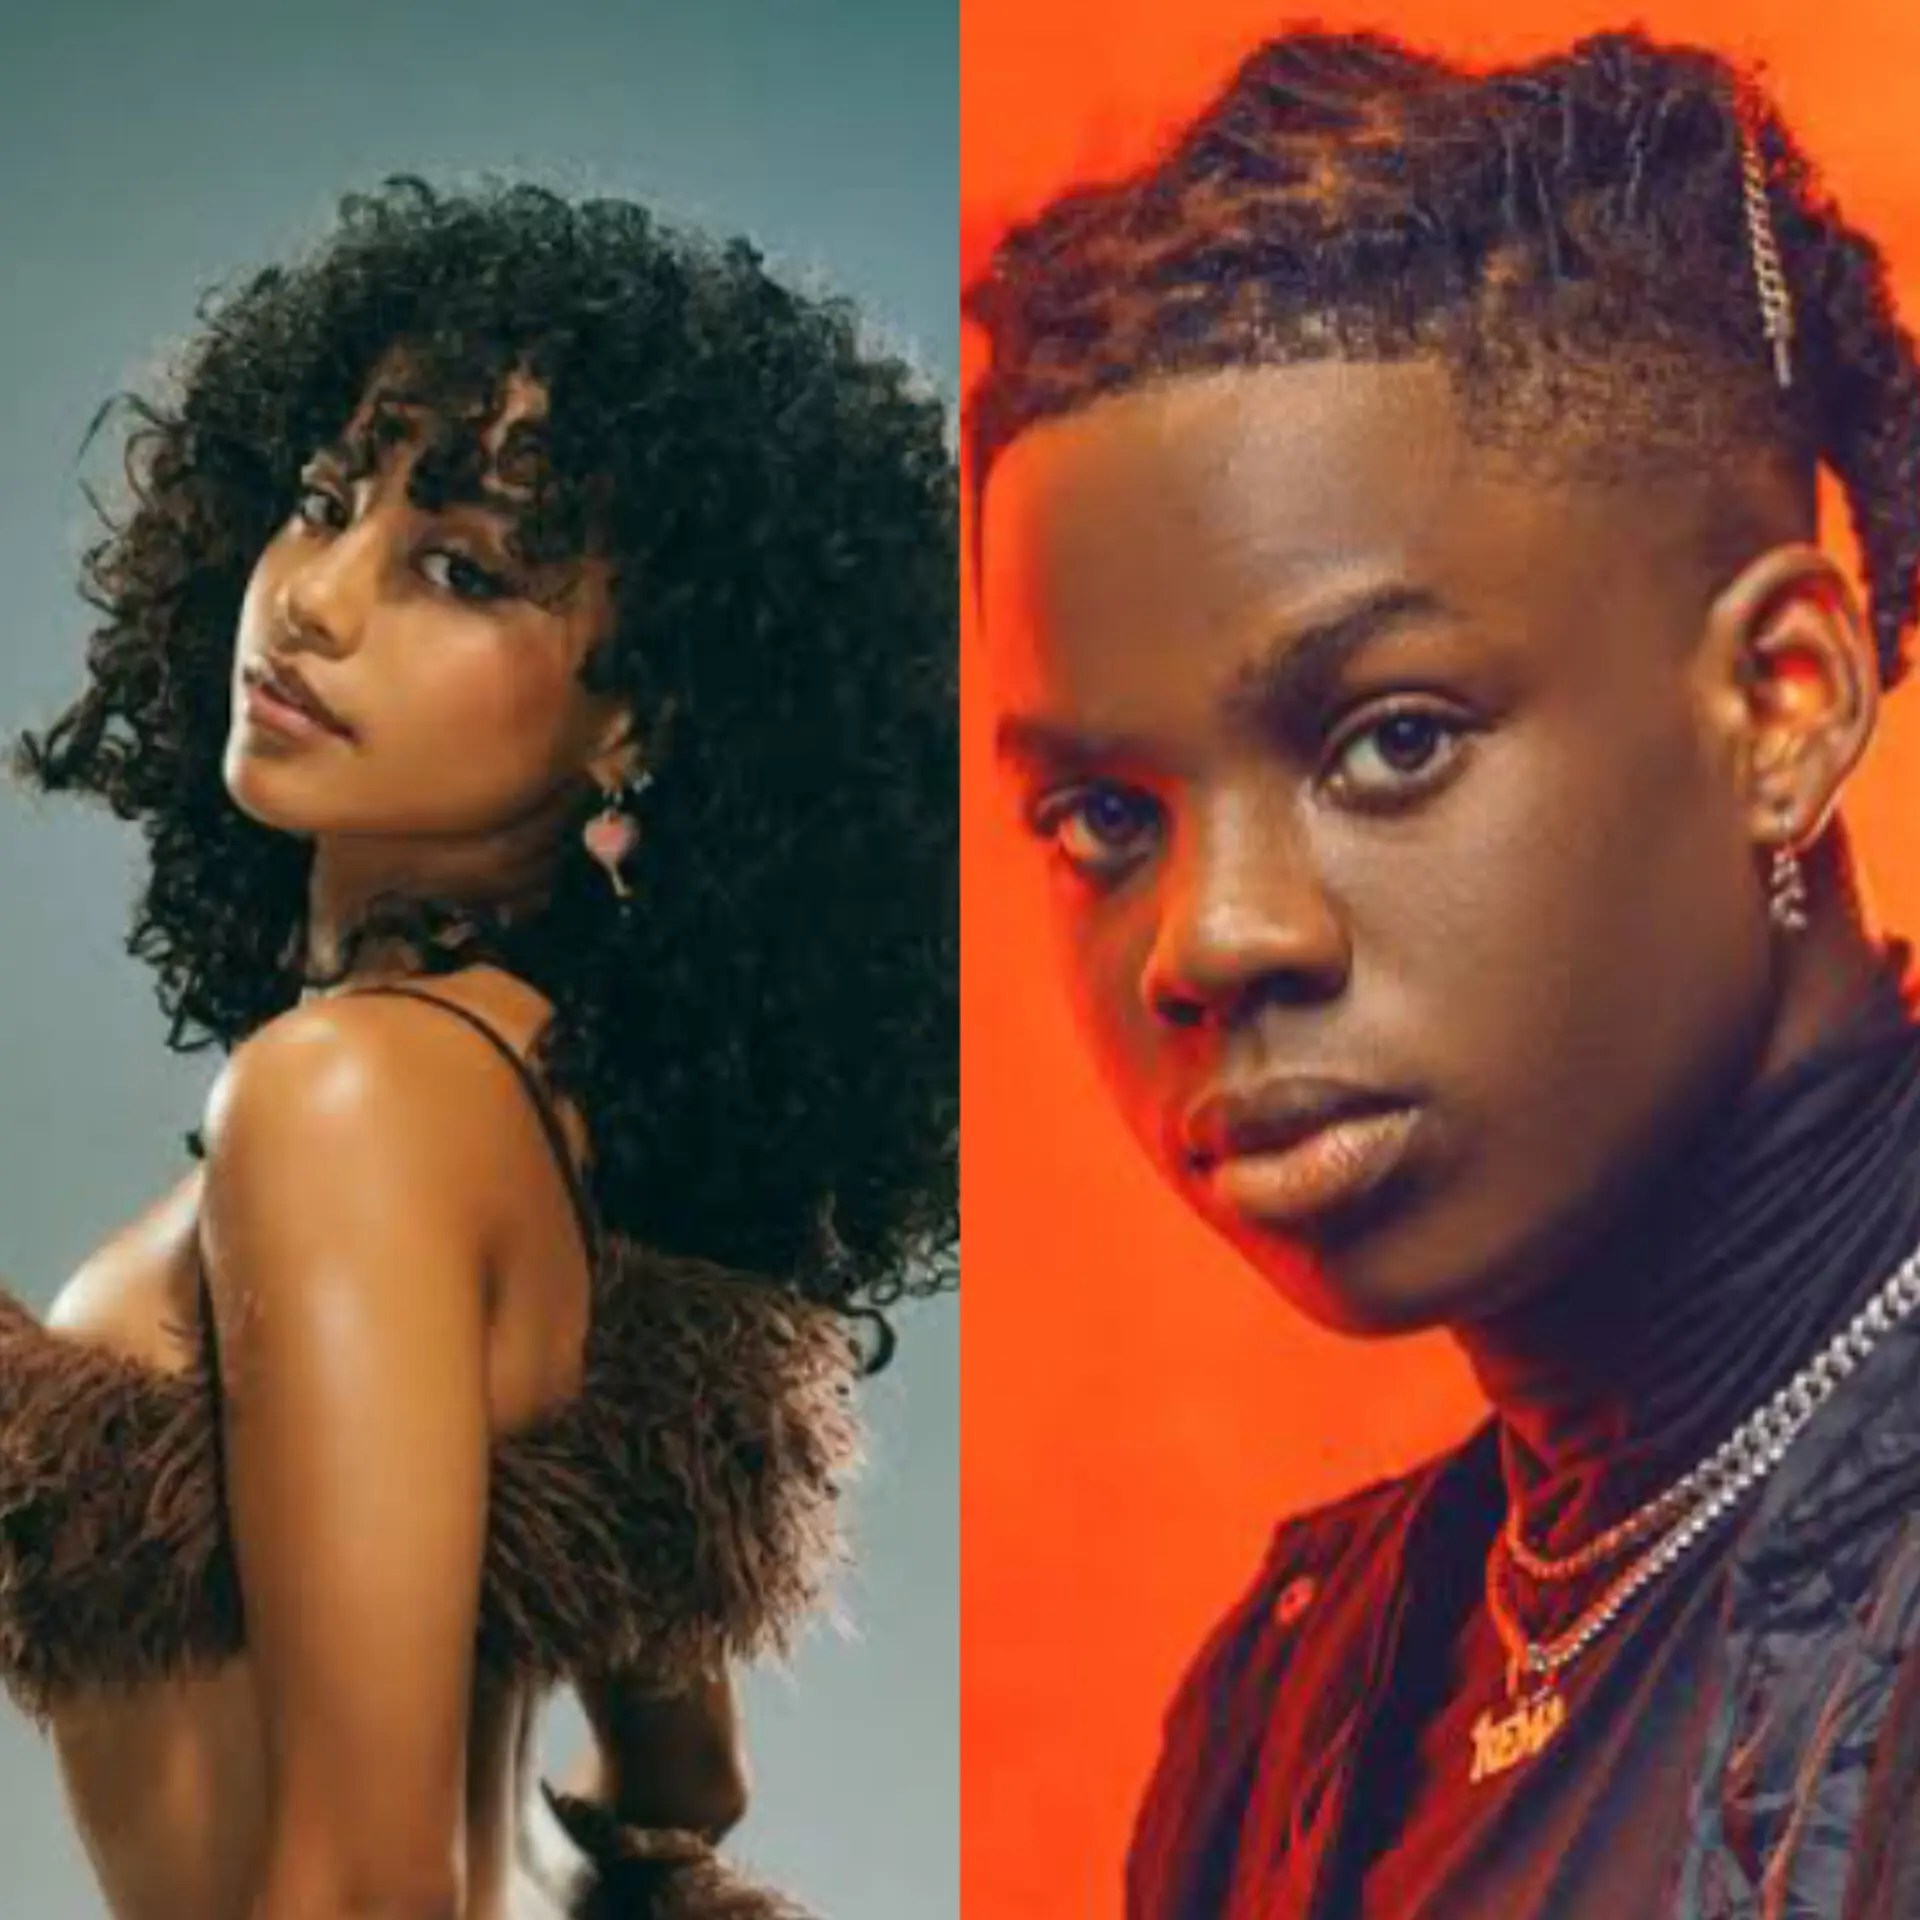 Singer Tyla speaks on dating Rema Daily Post Nigeria